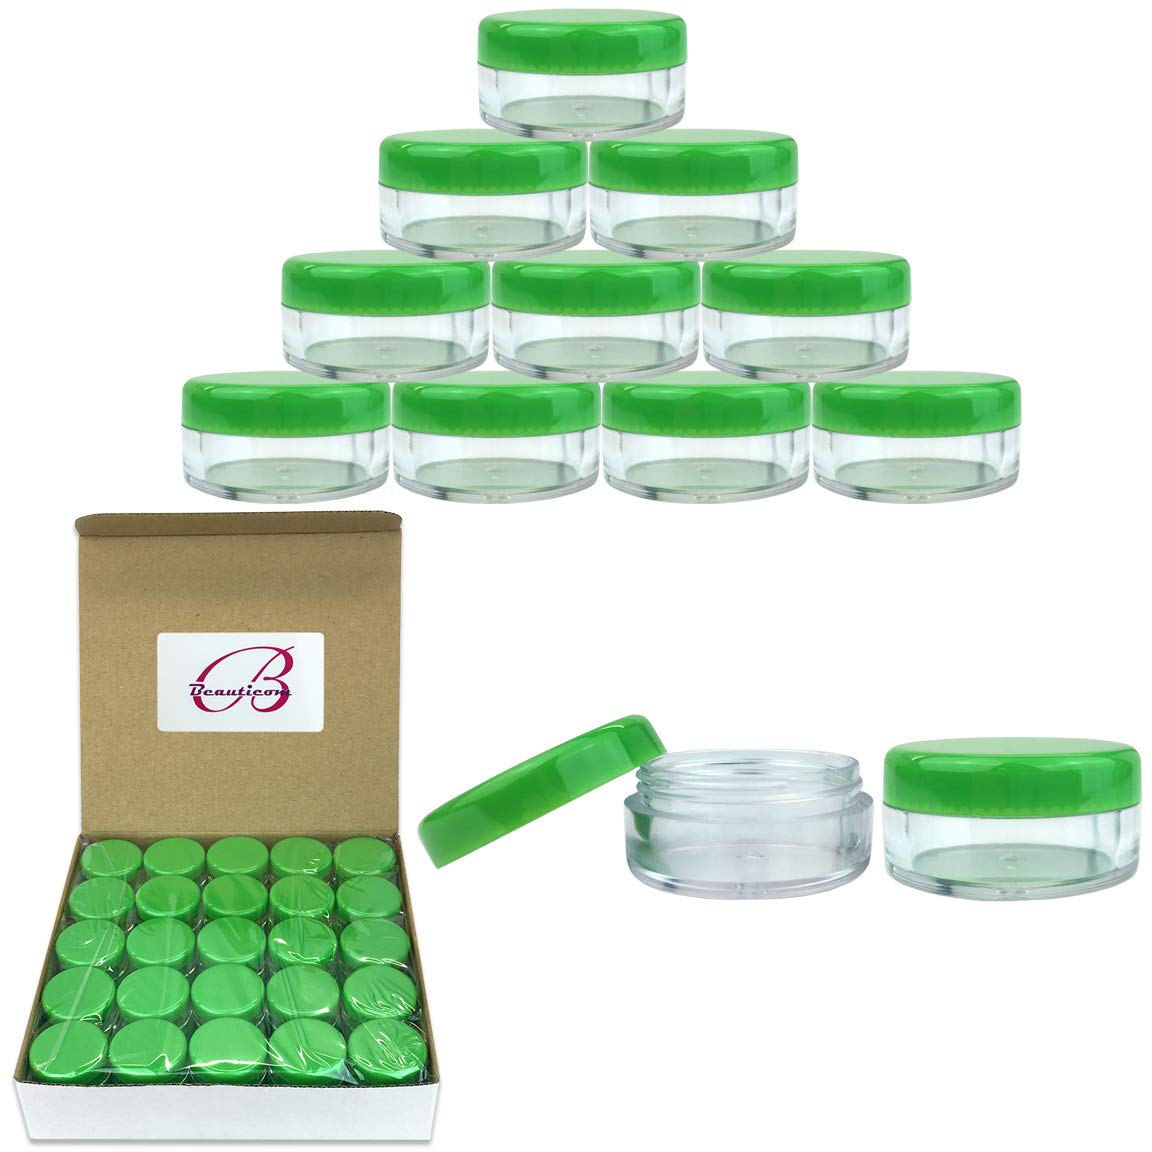 (Quantity: 50 Pieces) Beauticom 5G/5ML Round Clear Jars with GREEN Lids for Scrubs, Oils, Toner, Salves, Creams, Lotions, Makeup Samples, Lip Balms